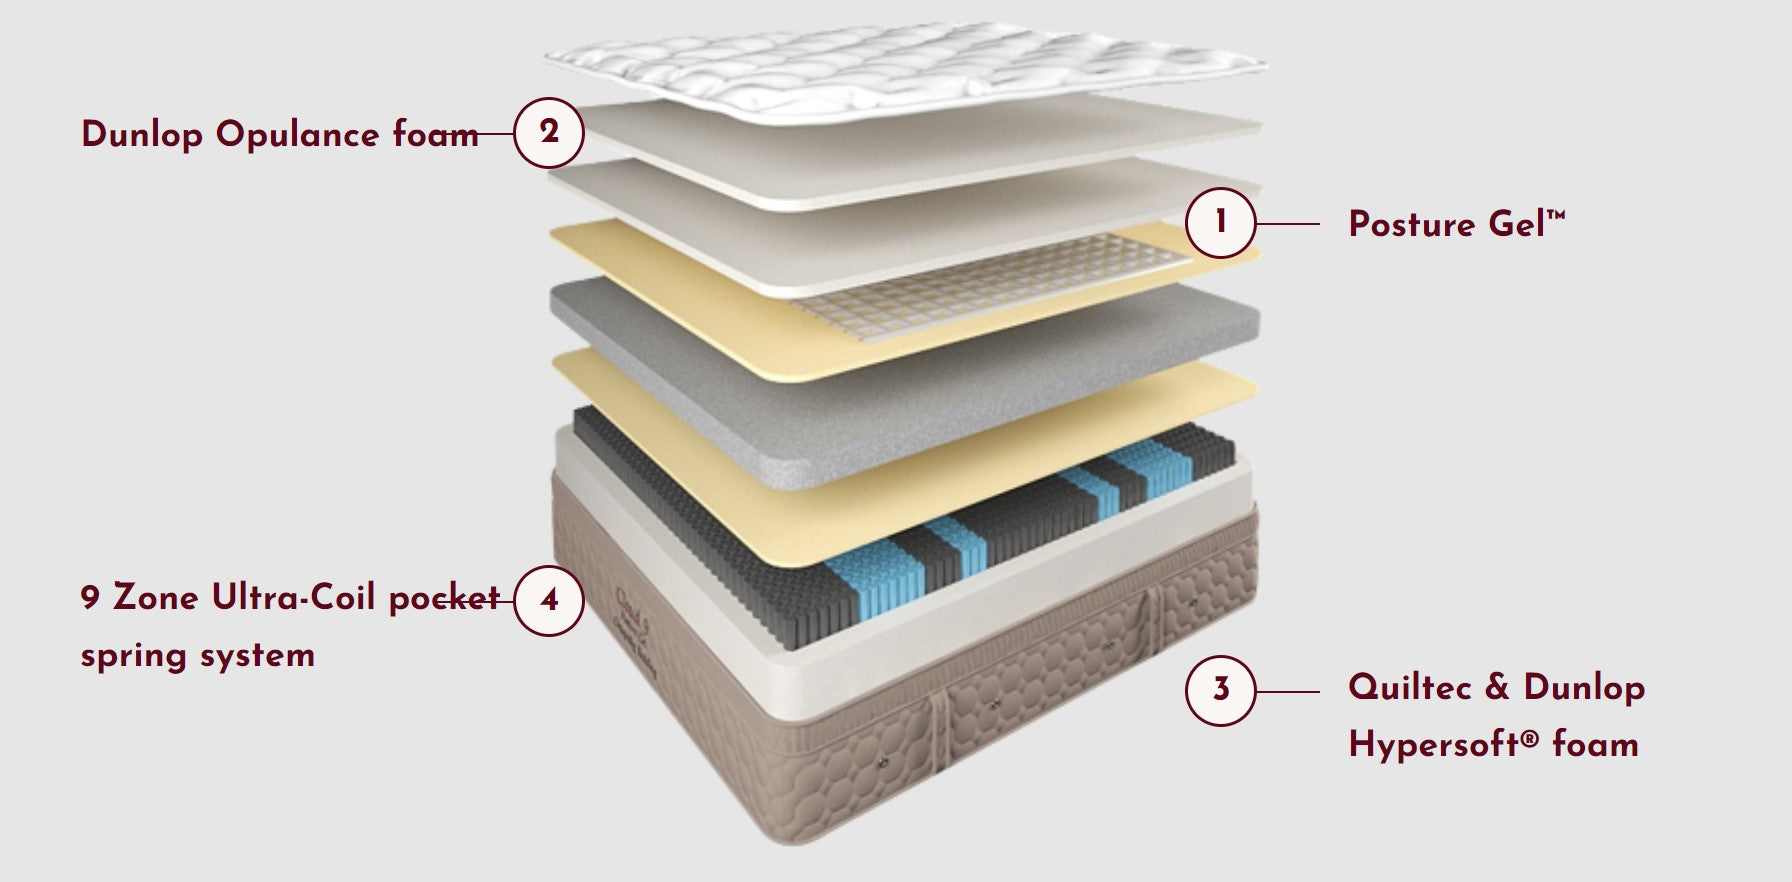 Yinahla Posture Gel Mattress Specifications - Available online & instore to try at Best in Beds